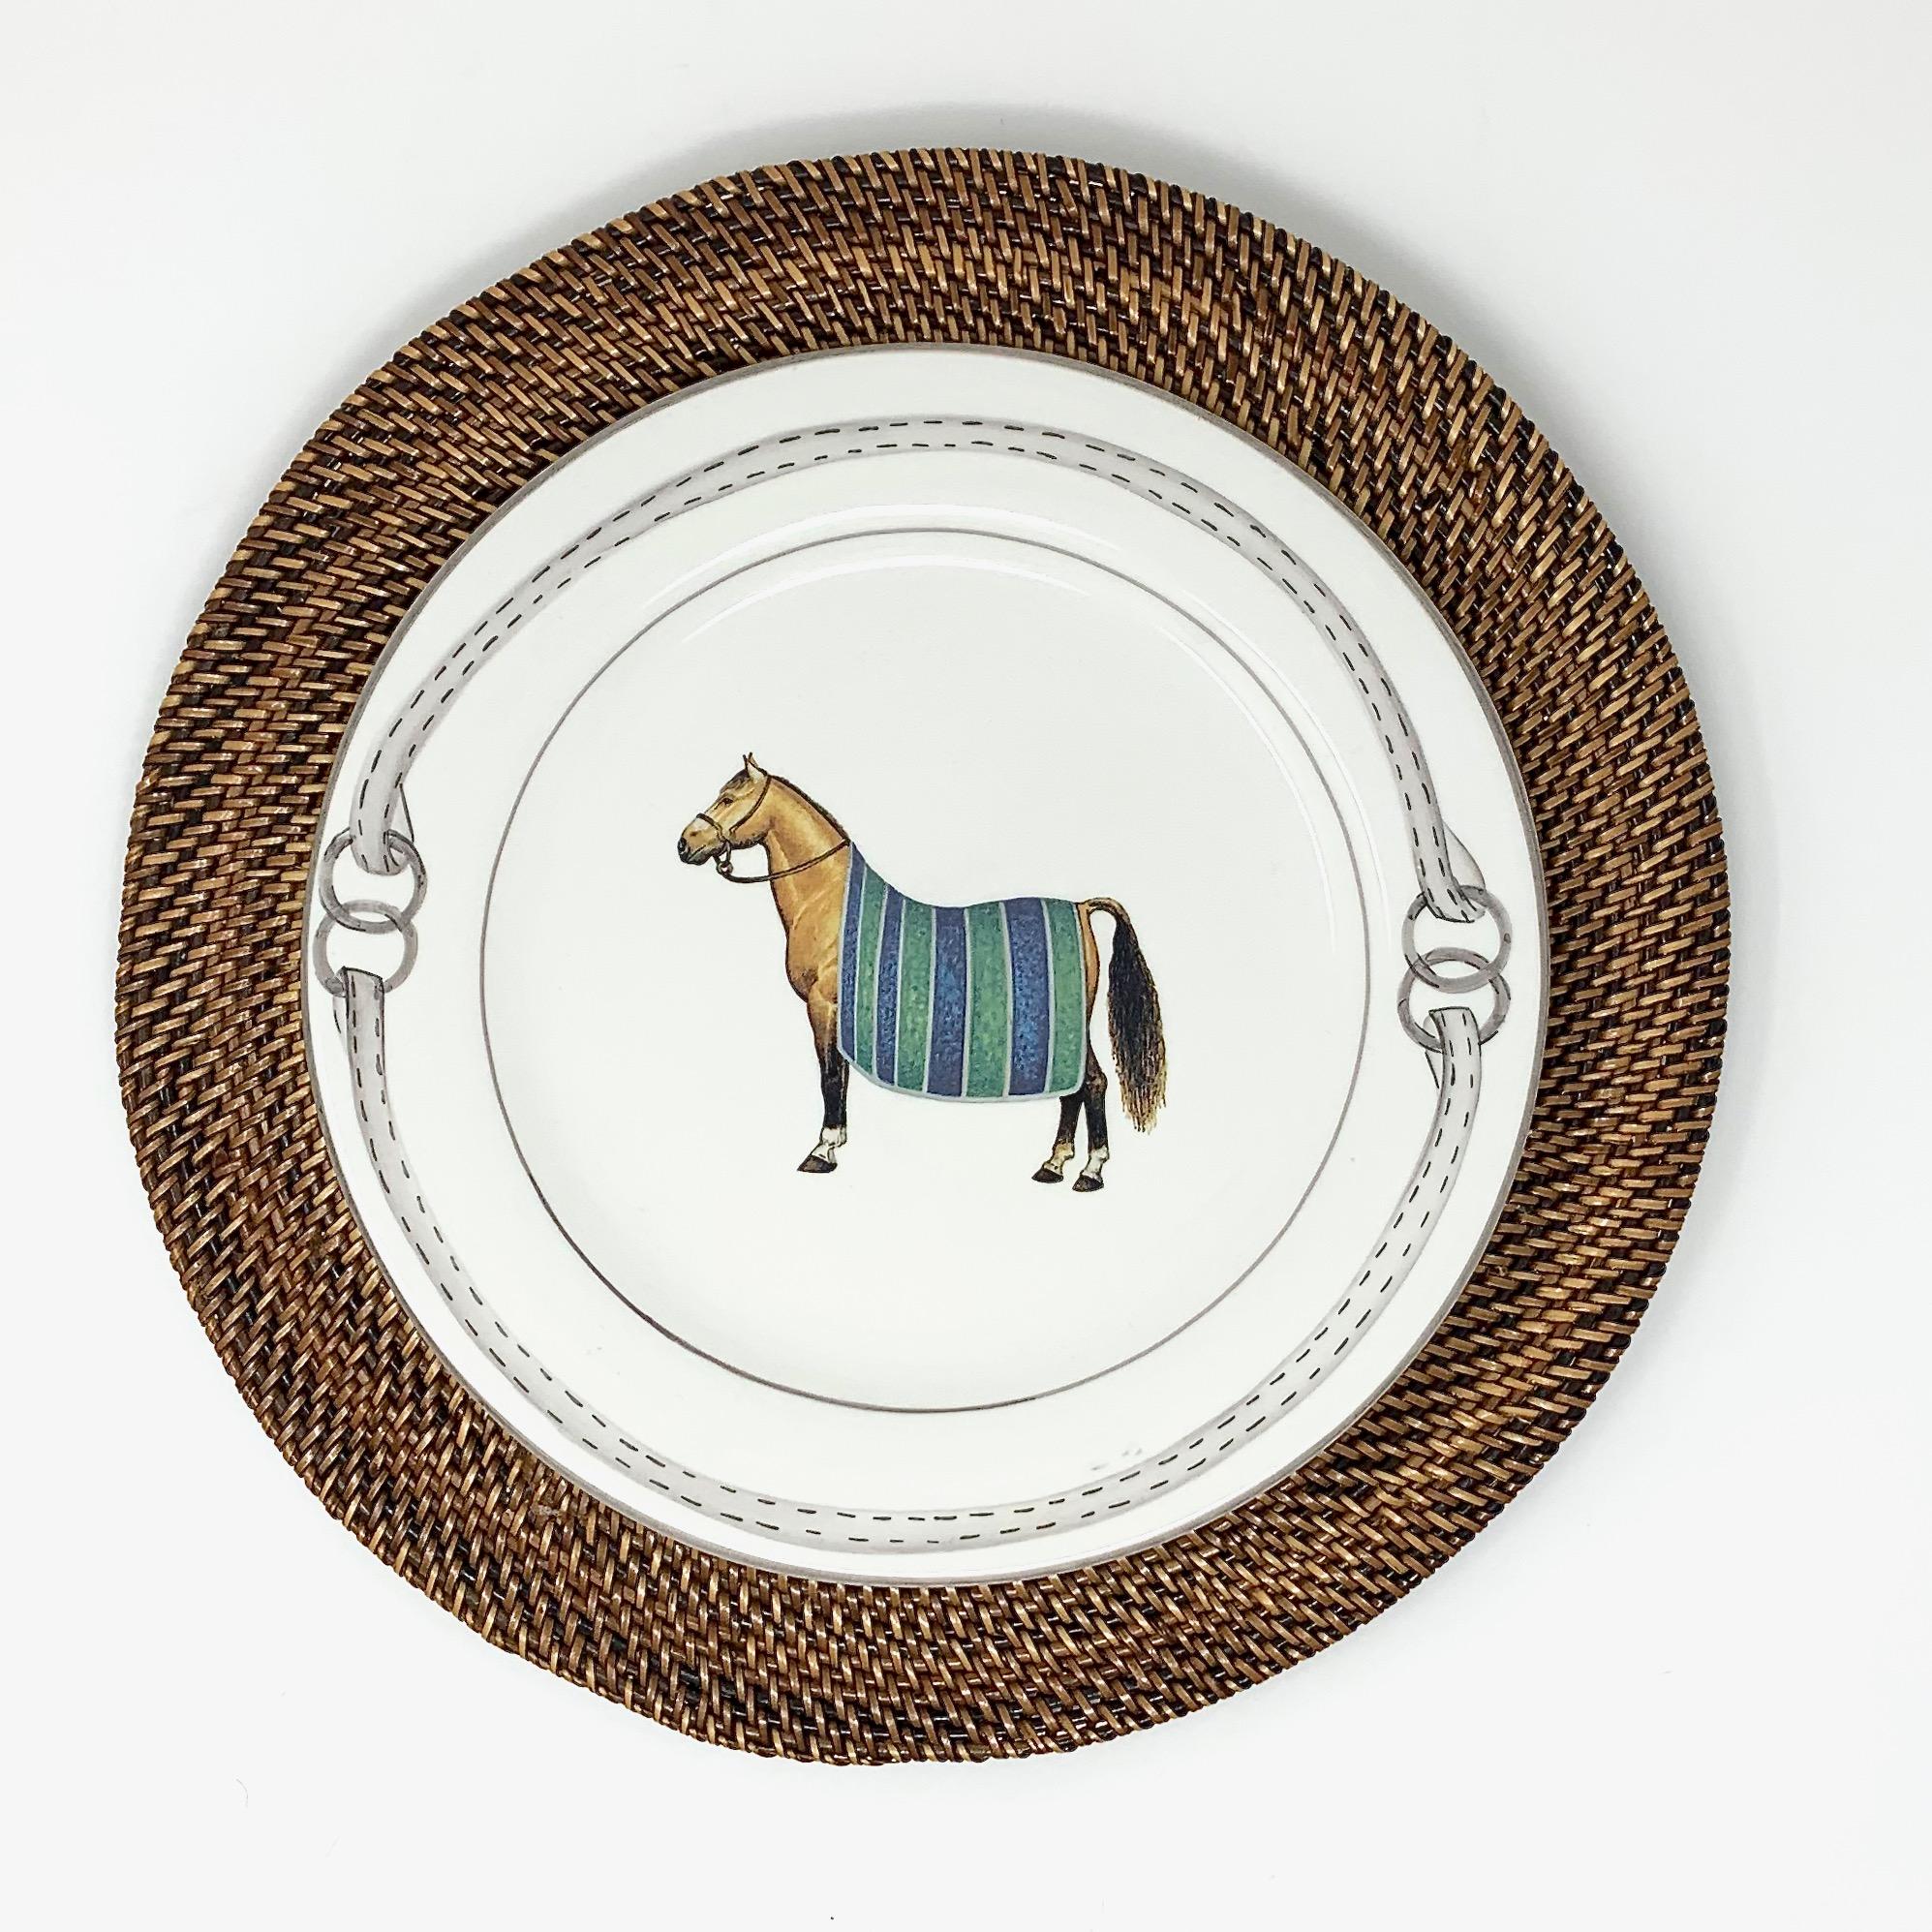 Devon Equestrian Dinner Plate - Set of 4, Made in Italy for The Mane Lion
Each plate features a different blanketed horse.

The Mane Lion was born in 1979 in the heart of Philadelphia's fabled Main Line, offering a line of charming, hand-painted